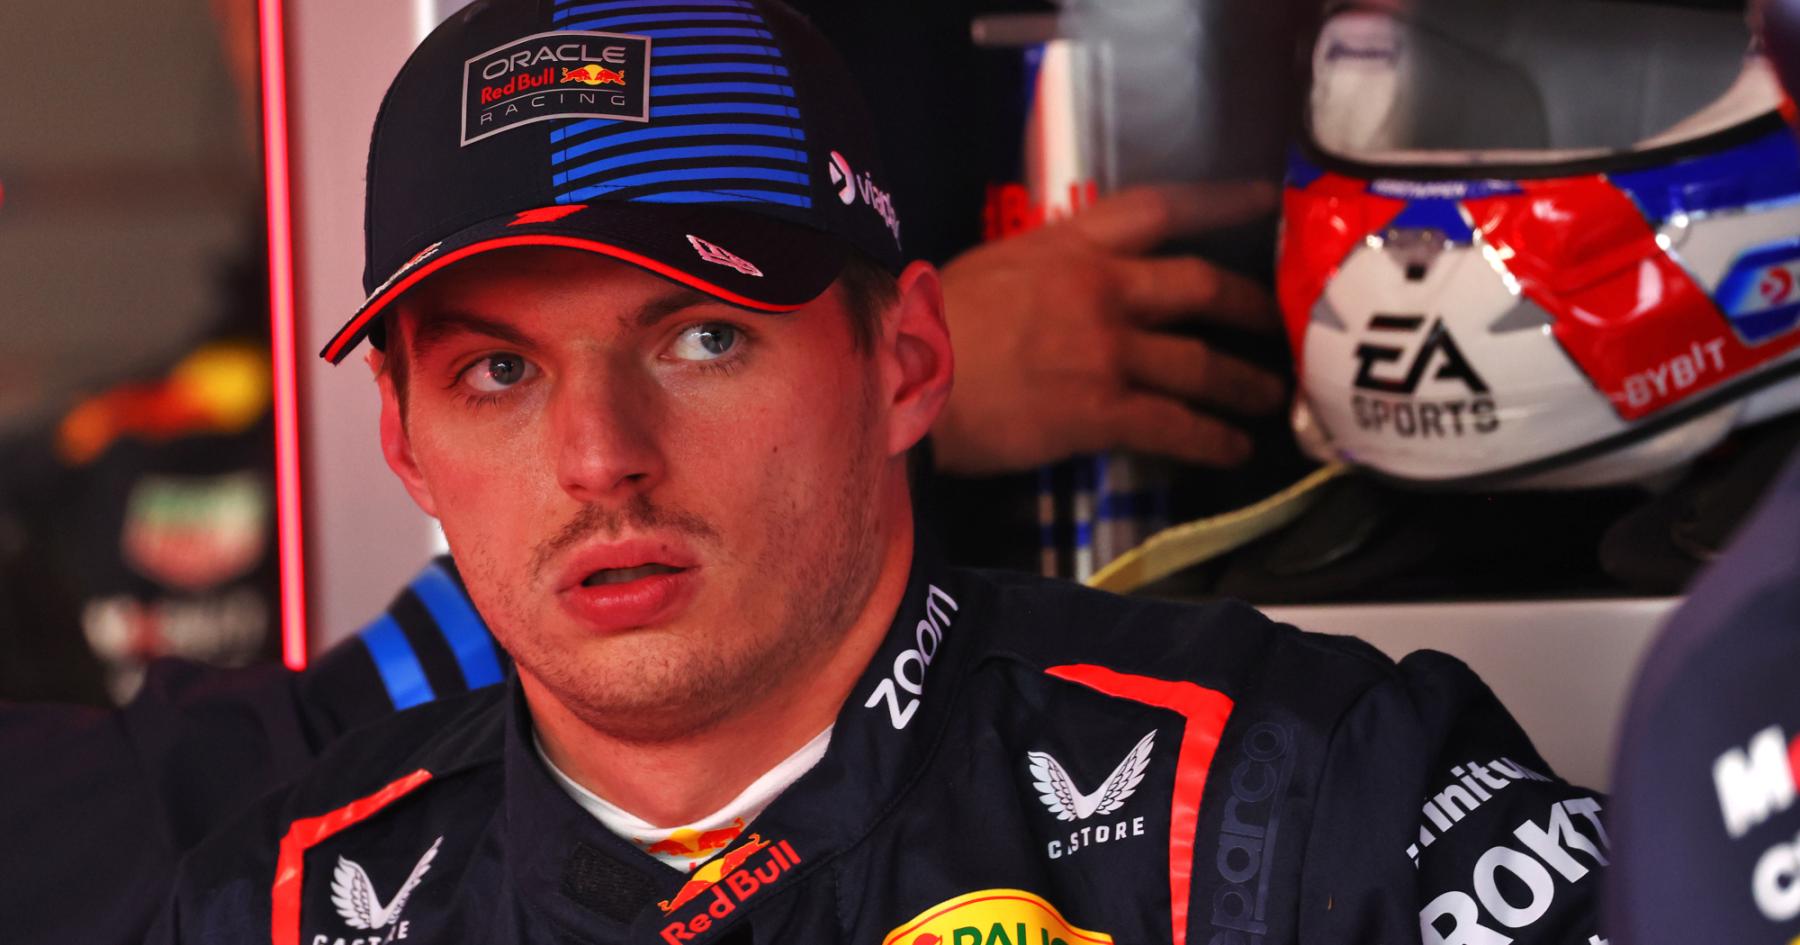 High Drama on the Track: Verstappen's Fear and Ferrari's Fine in the RacingNews365 Recap